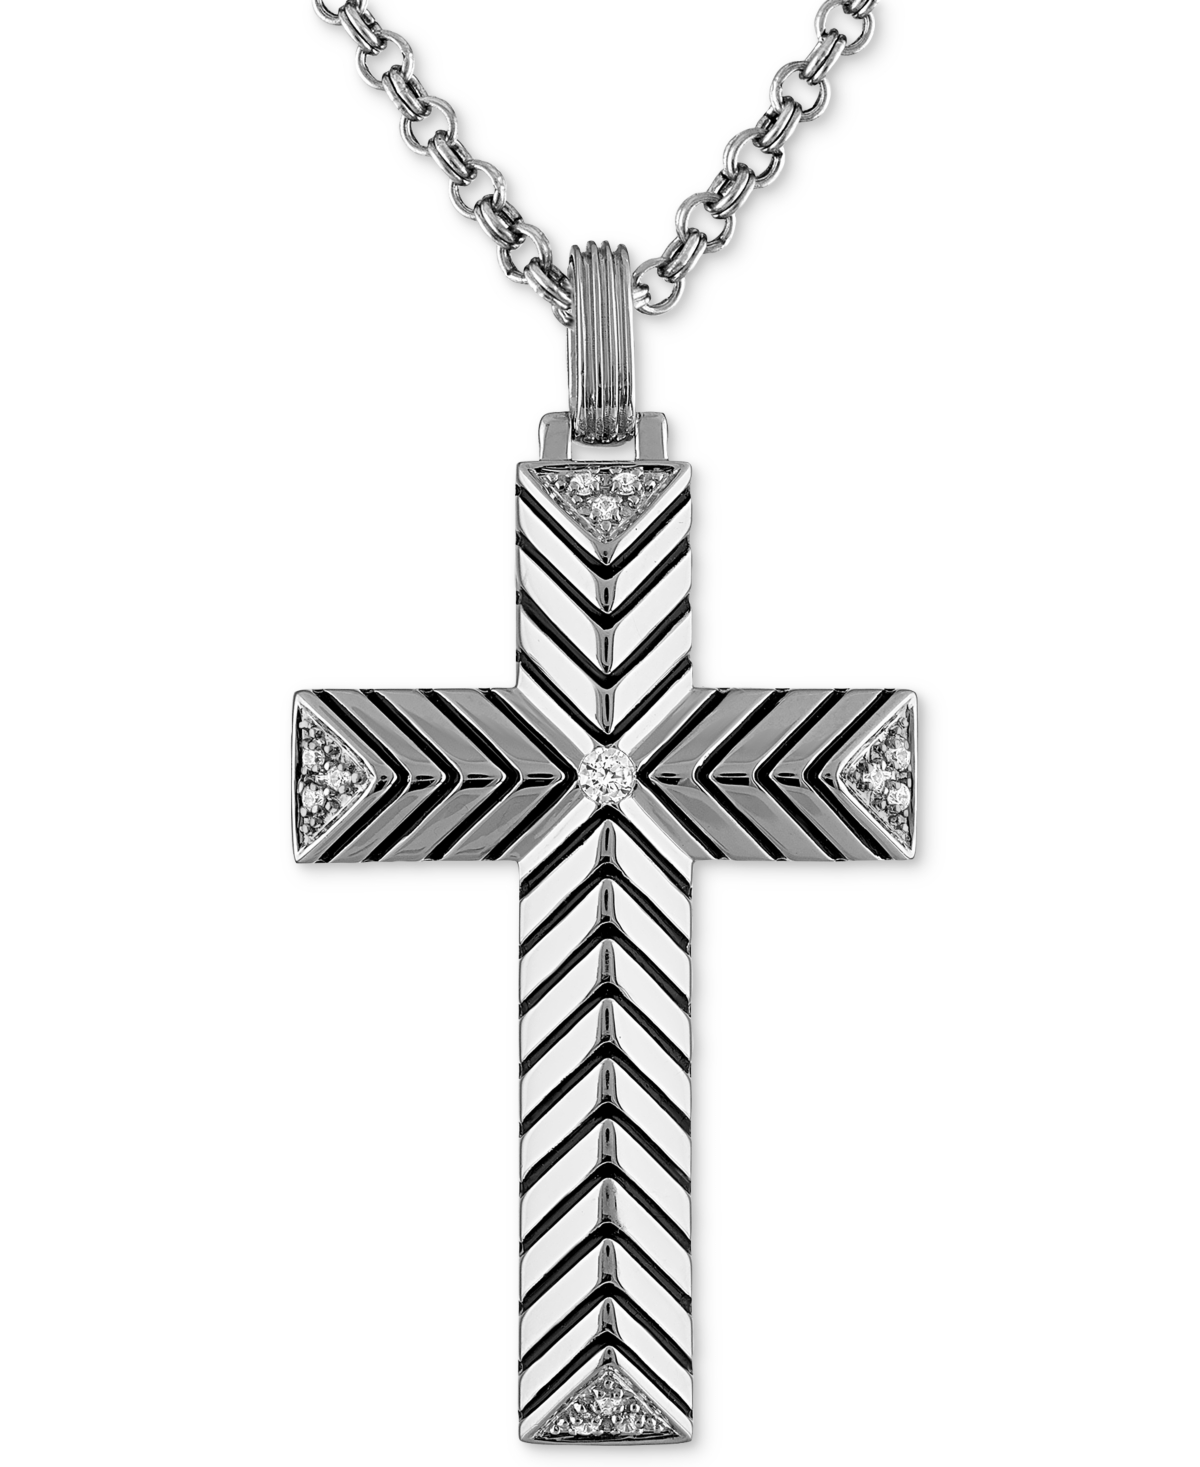 Diamond Textured Cross 22" Pendant Necklace (1/10 ct. t.w.), Created for Macy's - Gold Over Silver